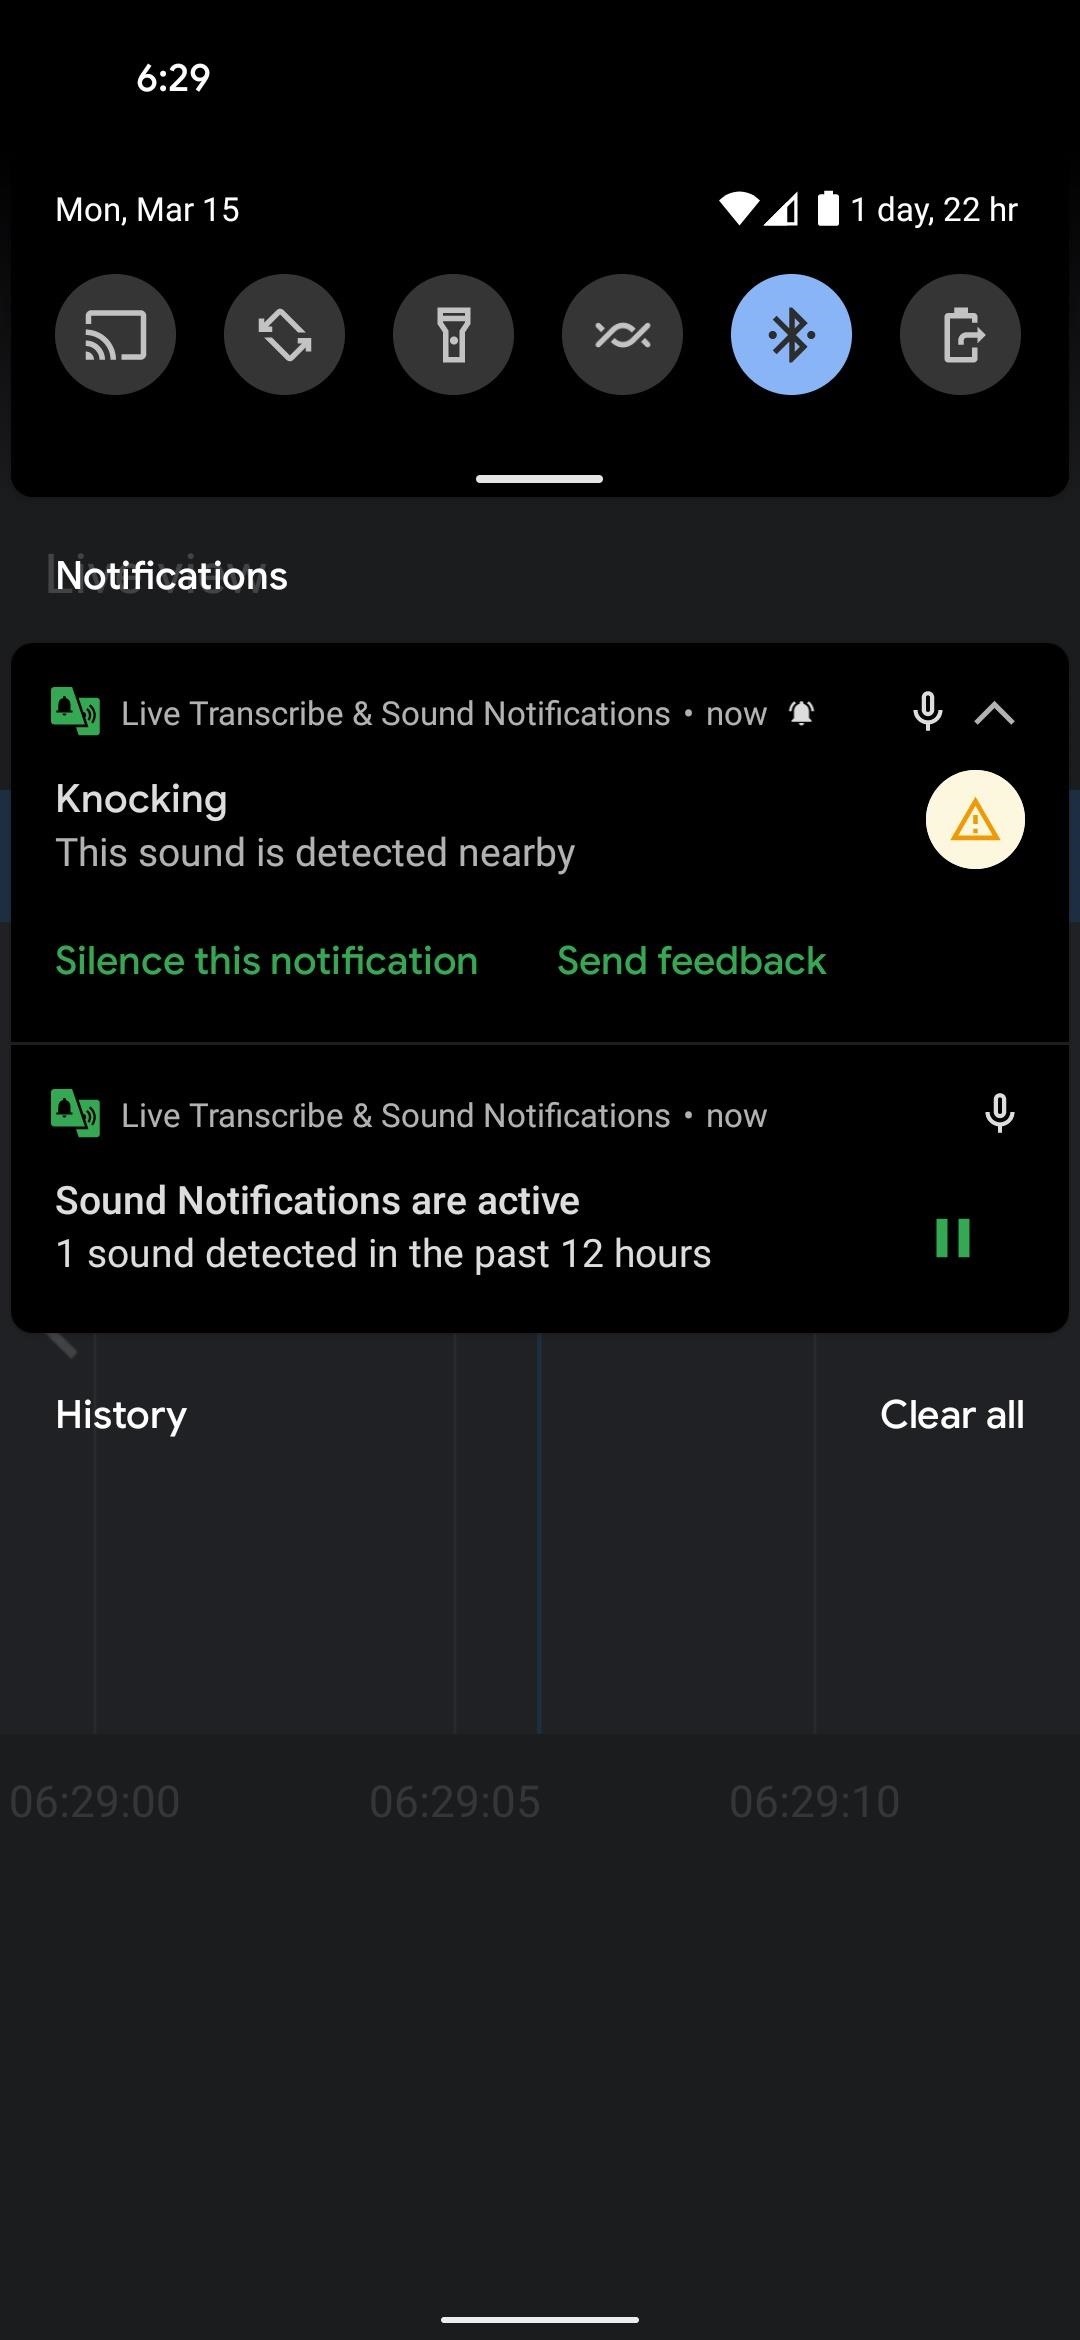 Your Android Phone Can Automatically Notify You When It Hears an Emergency